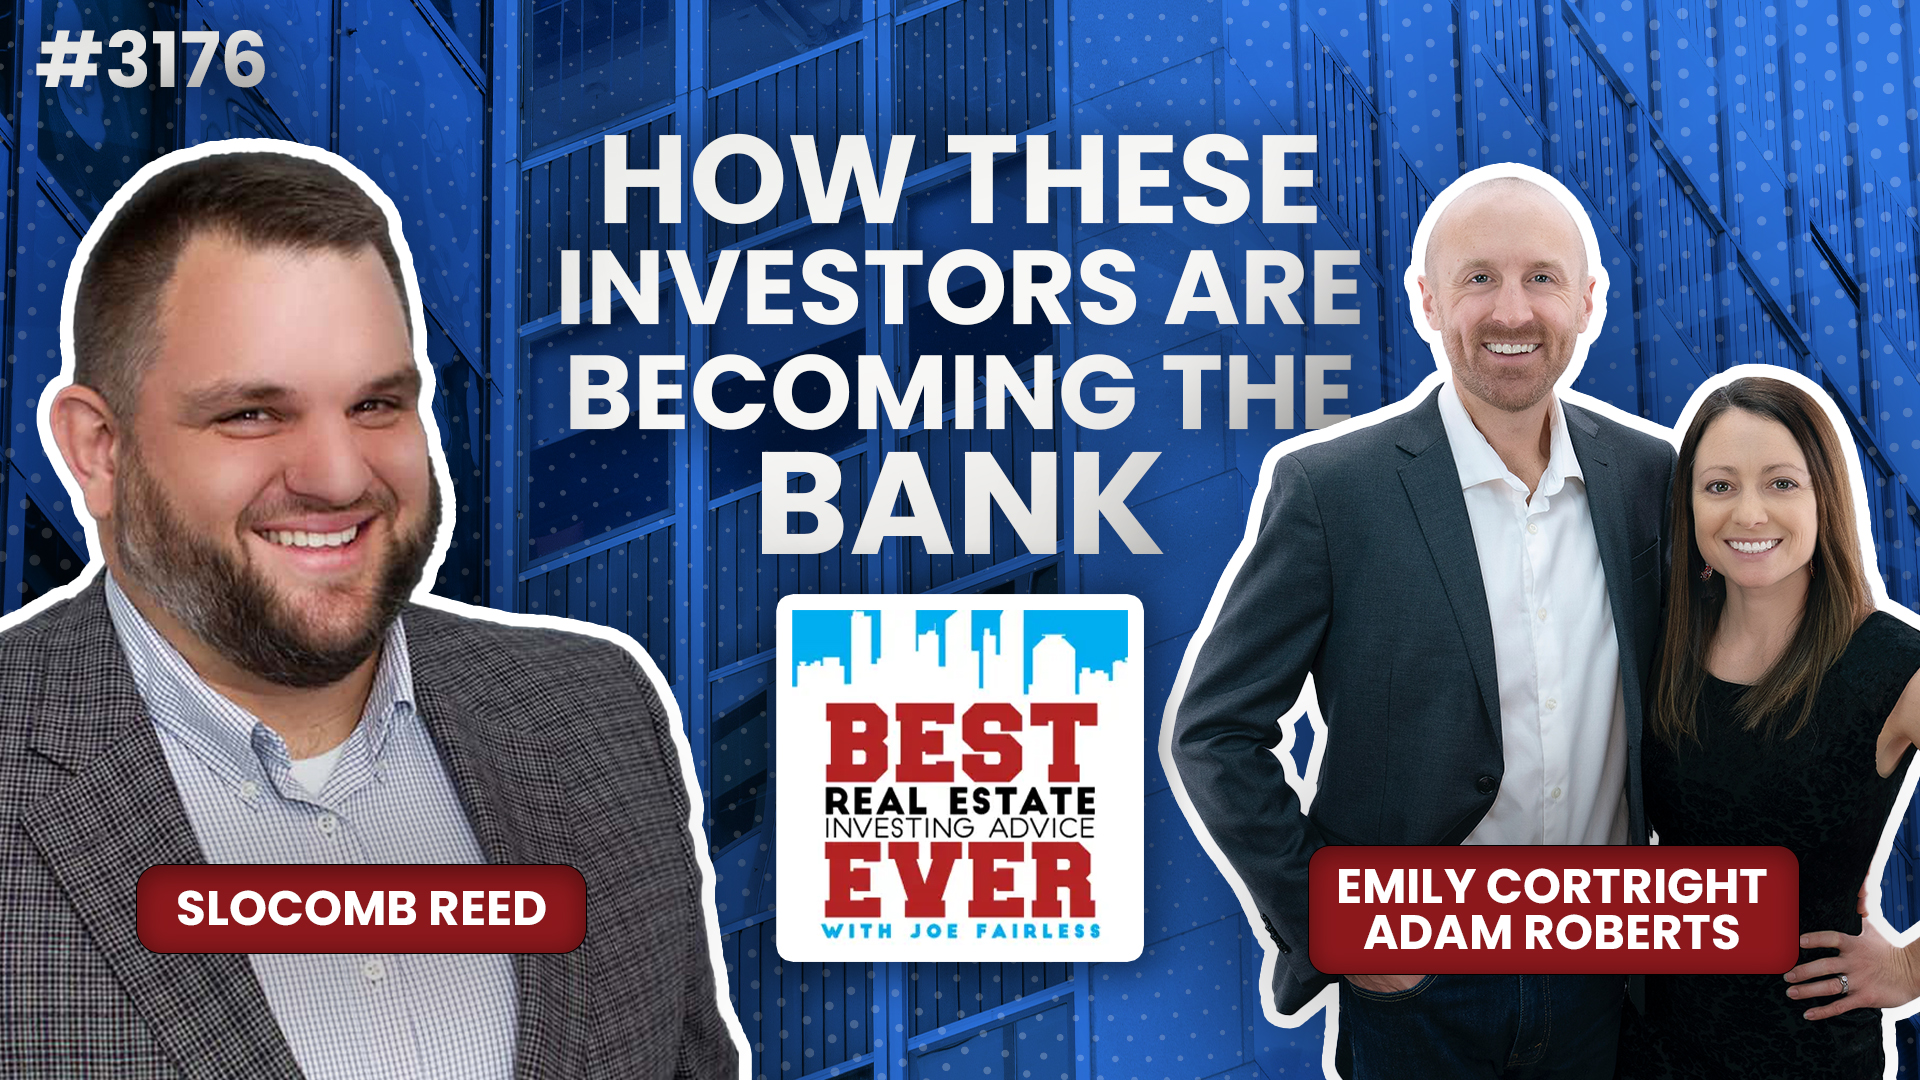 JF3176: How These Investors Are Becoming the Bank ft. Emily Cortright and Adam Roberts